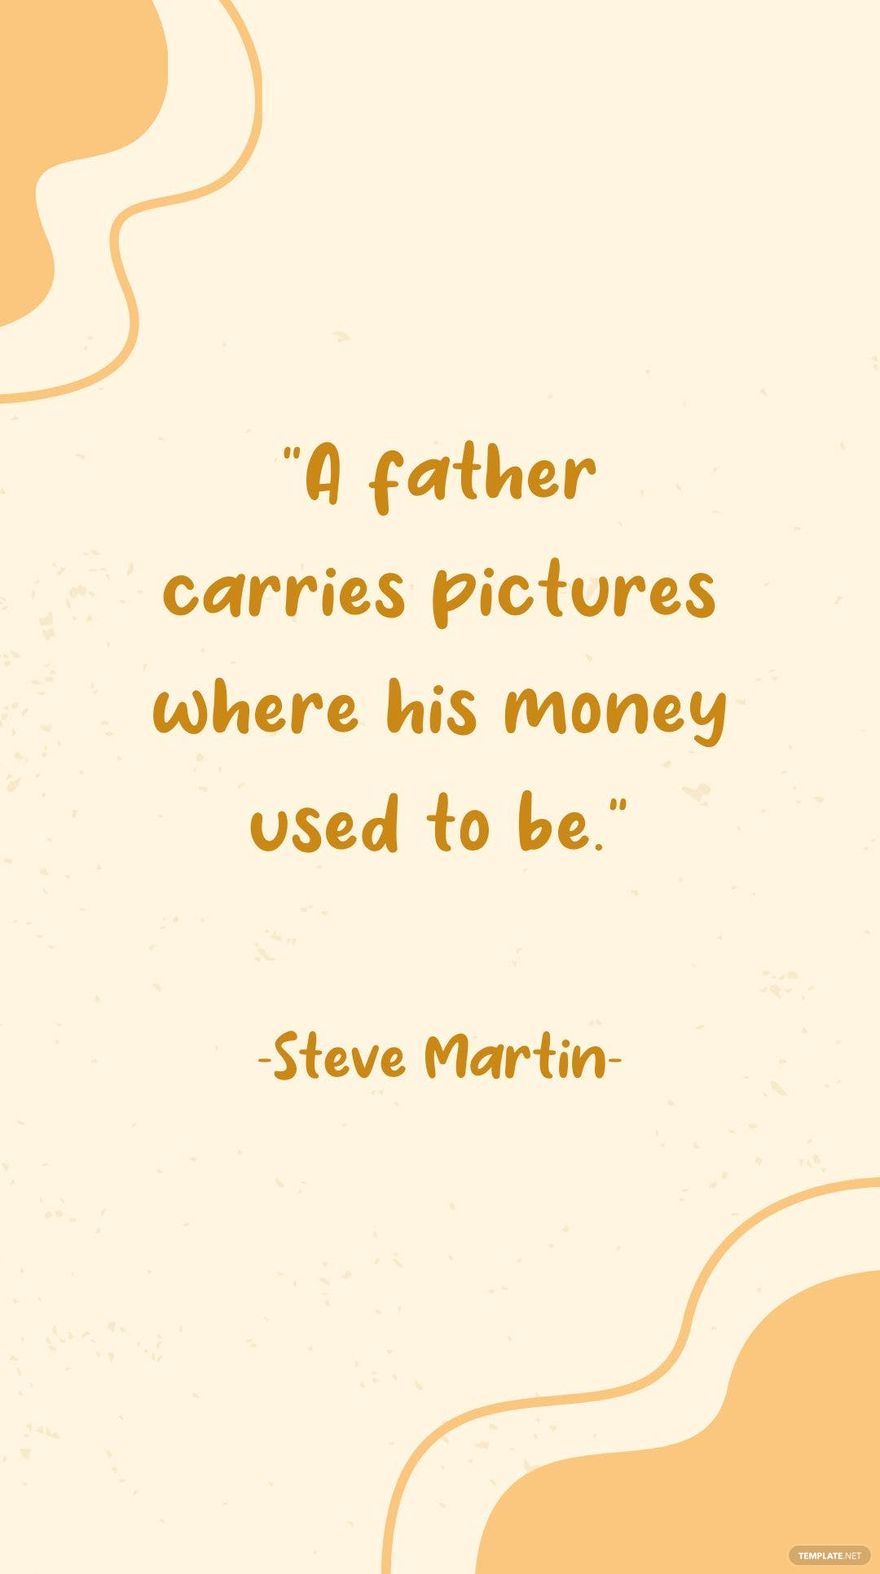 Free Steve Martin - A father carries pictures where his money used to be. in JPG